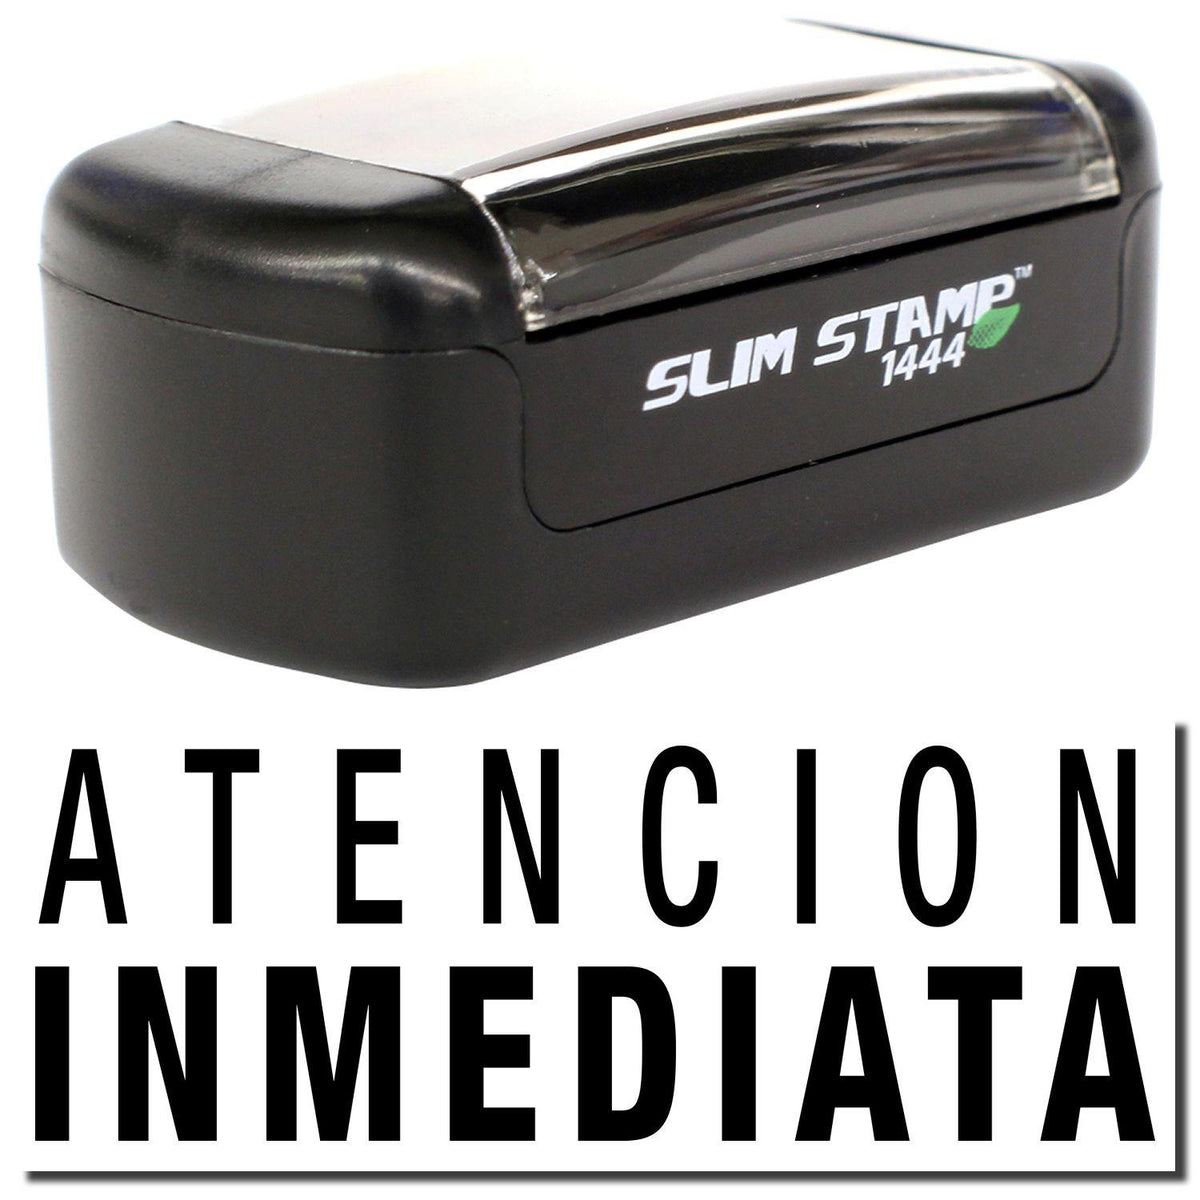 A stock office pre-inked stamp with a stamped image showing how the text &quot;ATENCION INMEDIATA&quot; is displayed after stamping.